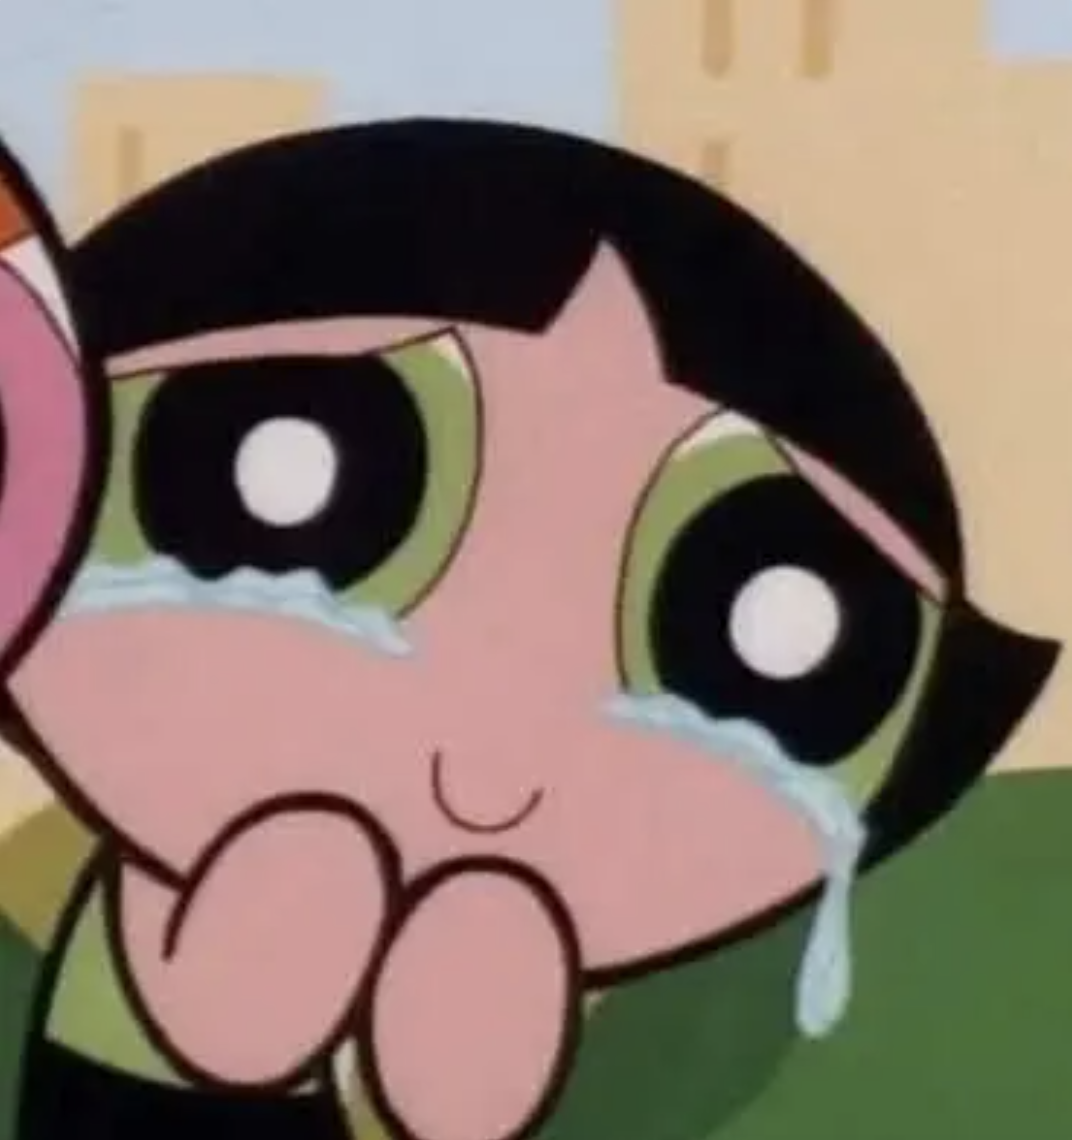 Buttercup from the animated show The PowerPuff Girls crying with joy